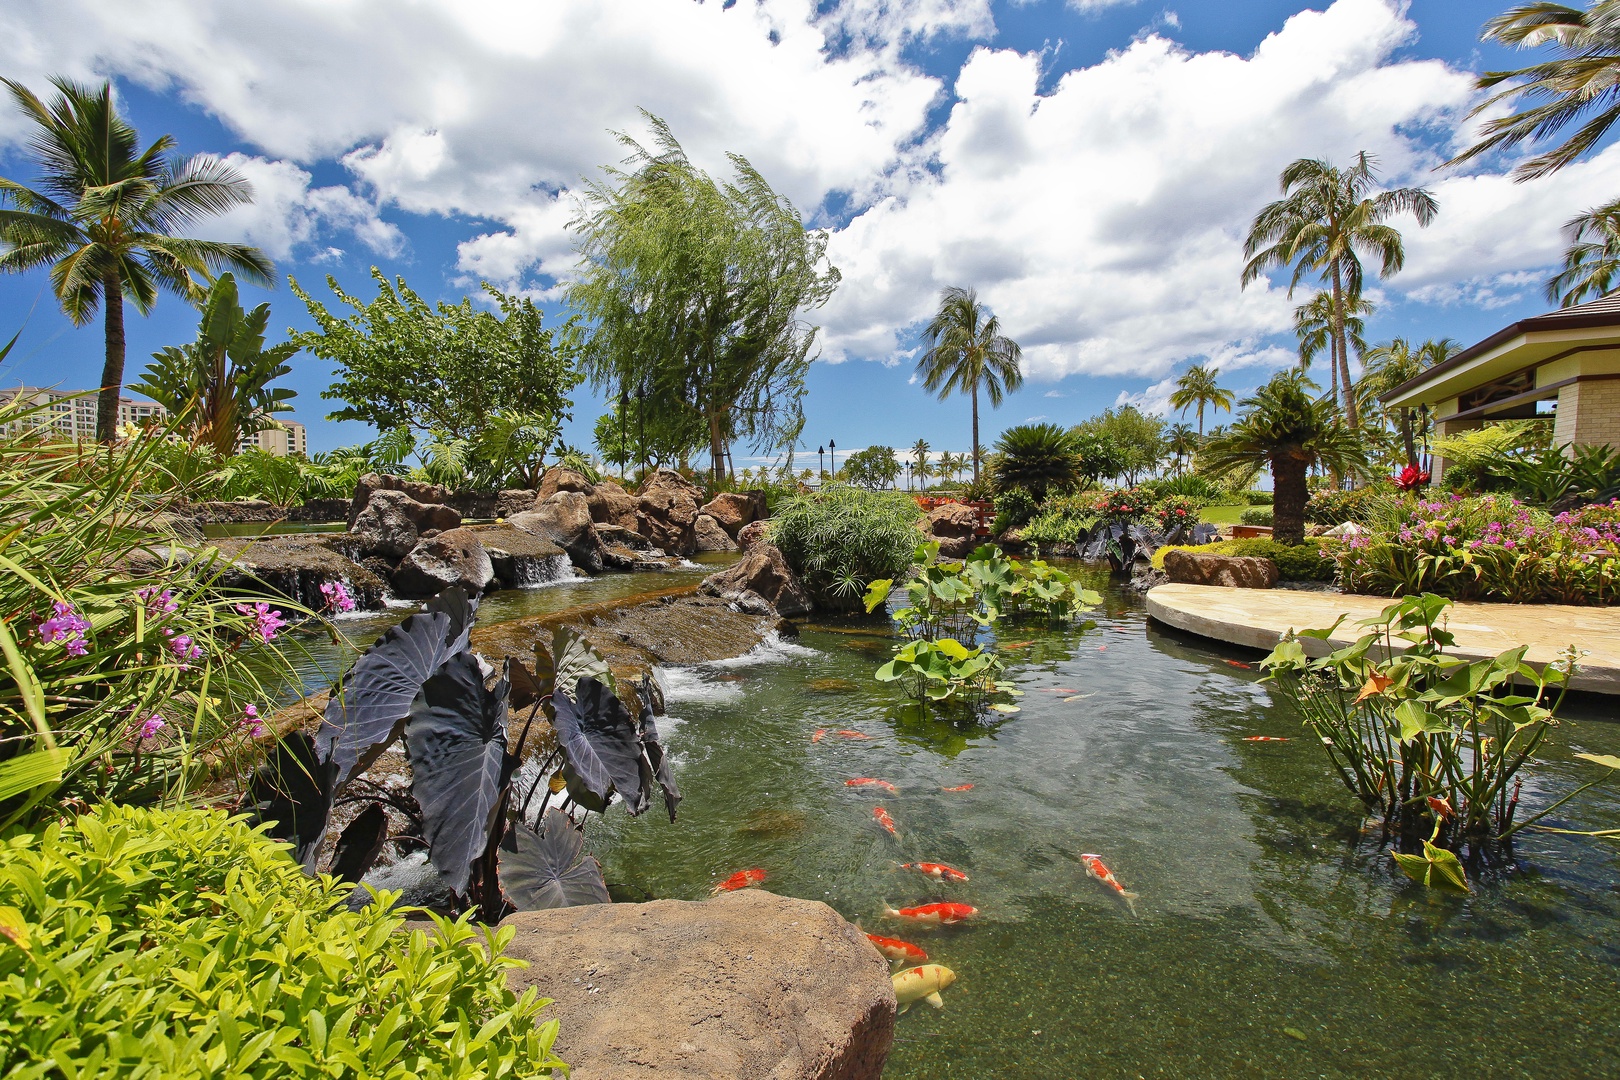 Kapolei Vacation Rentals, Ko Olina Beach Villas B609 - Sit a spell by the colorful Koi pond and reflective waters.